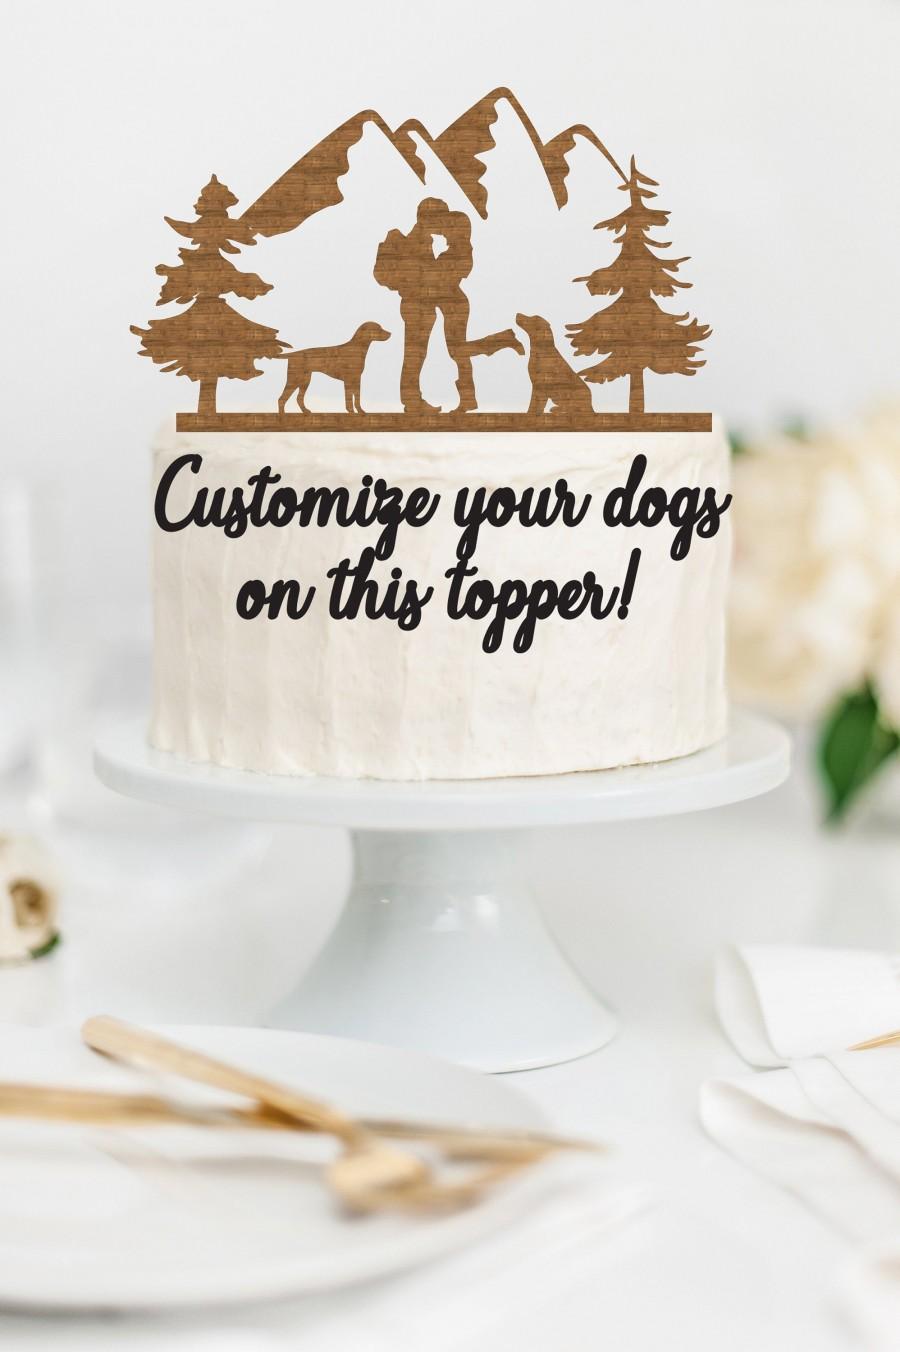 Hochzeit - HIKING COUPLE with CUSTOMIZABLE Dogs Wood Wedding Cake Topper / Backpacking outdoor bride groom cake topper / camping cake topper